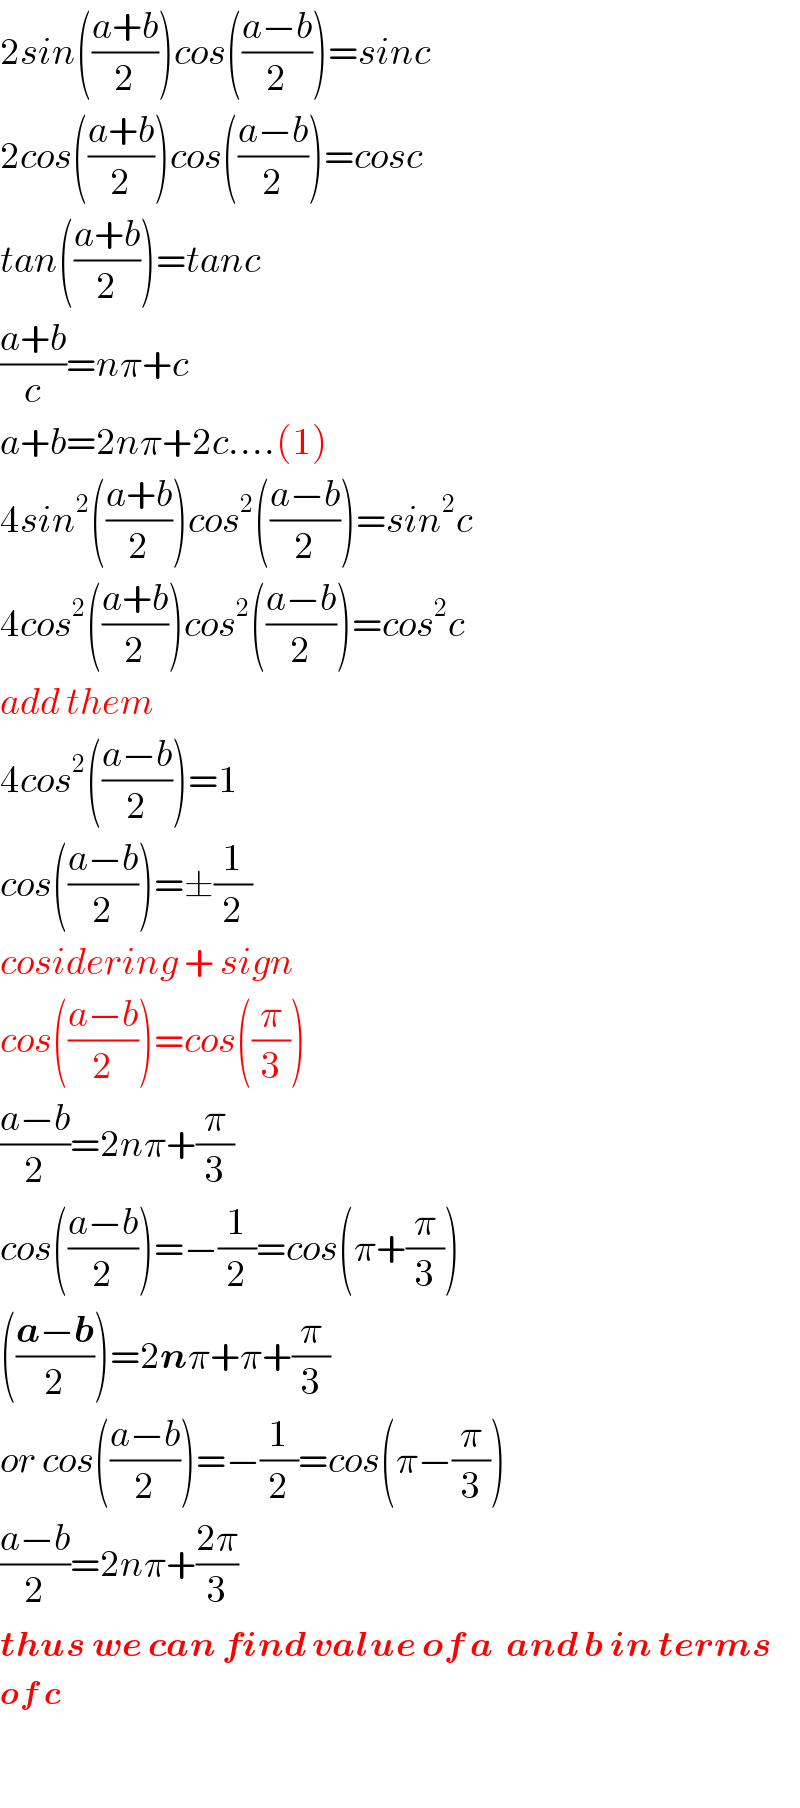 2sin(((a+b)/2))cos(((a−b)/2))=sinc  2cos(((a+b)/2))cos(((a−b)/2))=cosc  tan(((a+b)/2))=tanc  ((a+b)/c)=nπ+c  a+b=2nπ+2c....(1)  4sin^2 (((a+b)/2))cos^2 (((a−b)/2))=sin^2 c  4cos^2 (((a+b)/2))cos^2 (((a−b)/2))=cos^2 c  add them  4cos^2 (((a−b)/2))=1  cos(((a−b)/2))=±(1/2)  cosidering + sign  cos(((a−b)/2))=cos((π/3))  ((a−b)/2)=2nπ+(π/3)  cos(((a−b)/2))=−(1/2)=cos(π+(π/3))     (((a−b)/2))=2nπ+π+(π/3)  or cos(((a−b)/2))=−(1/2)=cos(π−(π/3))  ((a−b)/2)=2nπ+((2π)/3)  thus we can find value of a  and b in terms   of c    